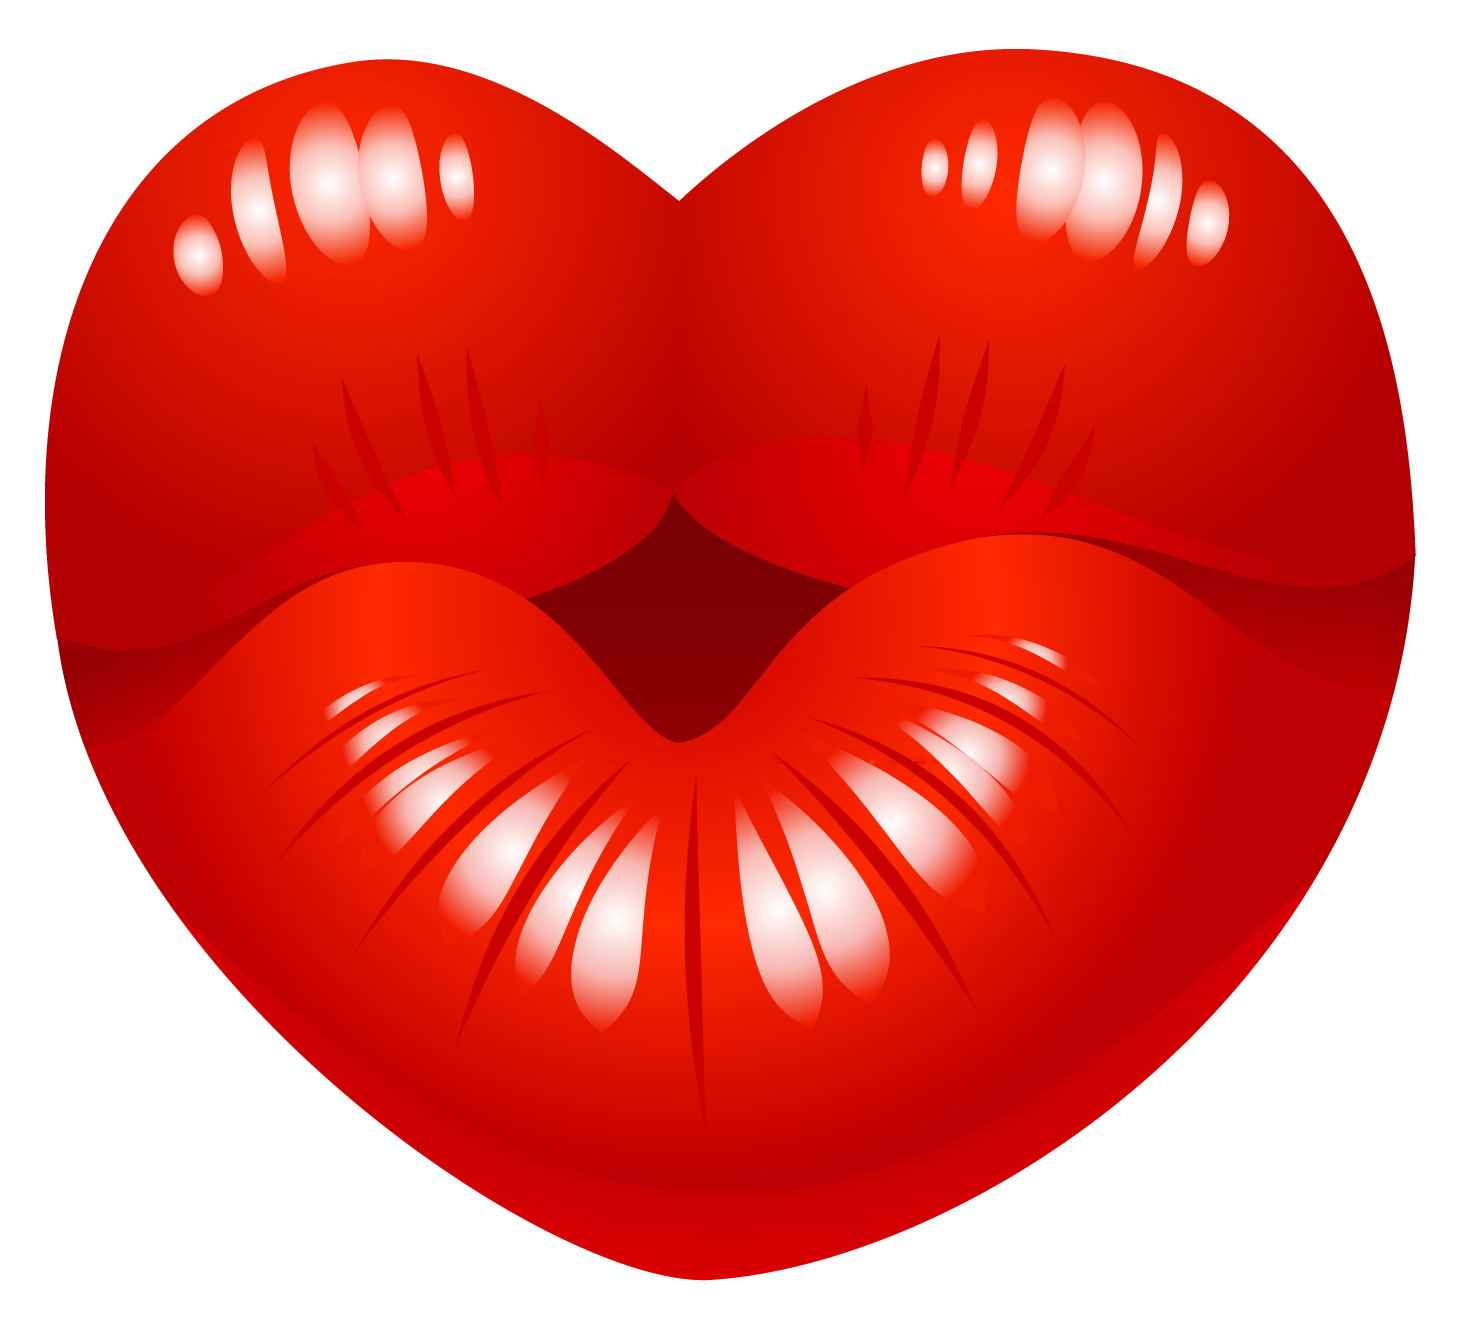 Kiss clipart large. Png images free download